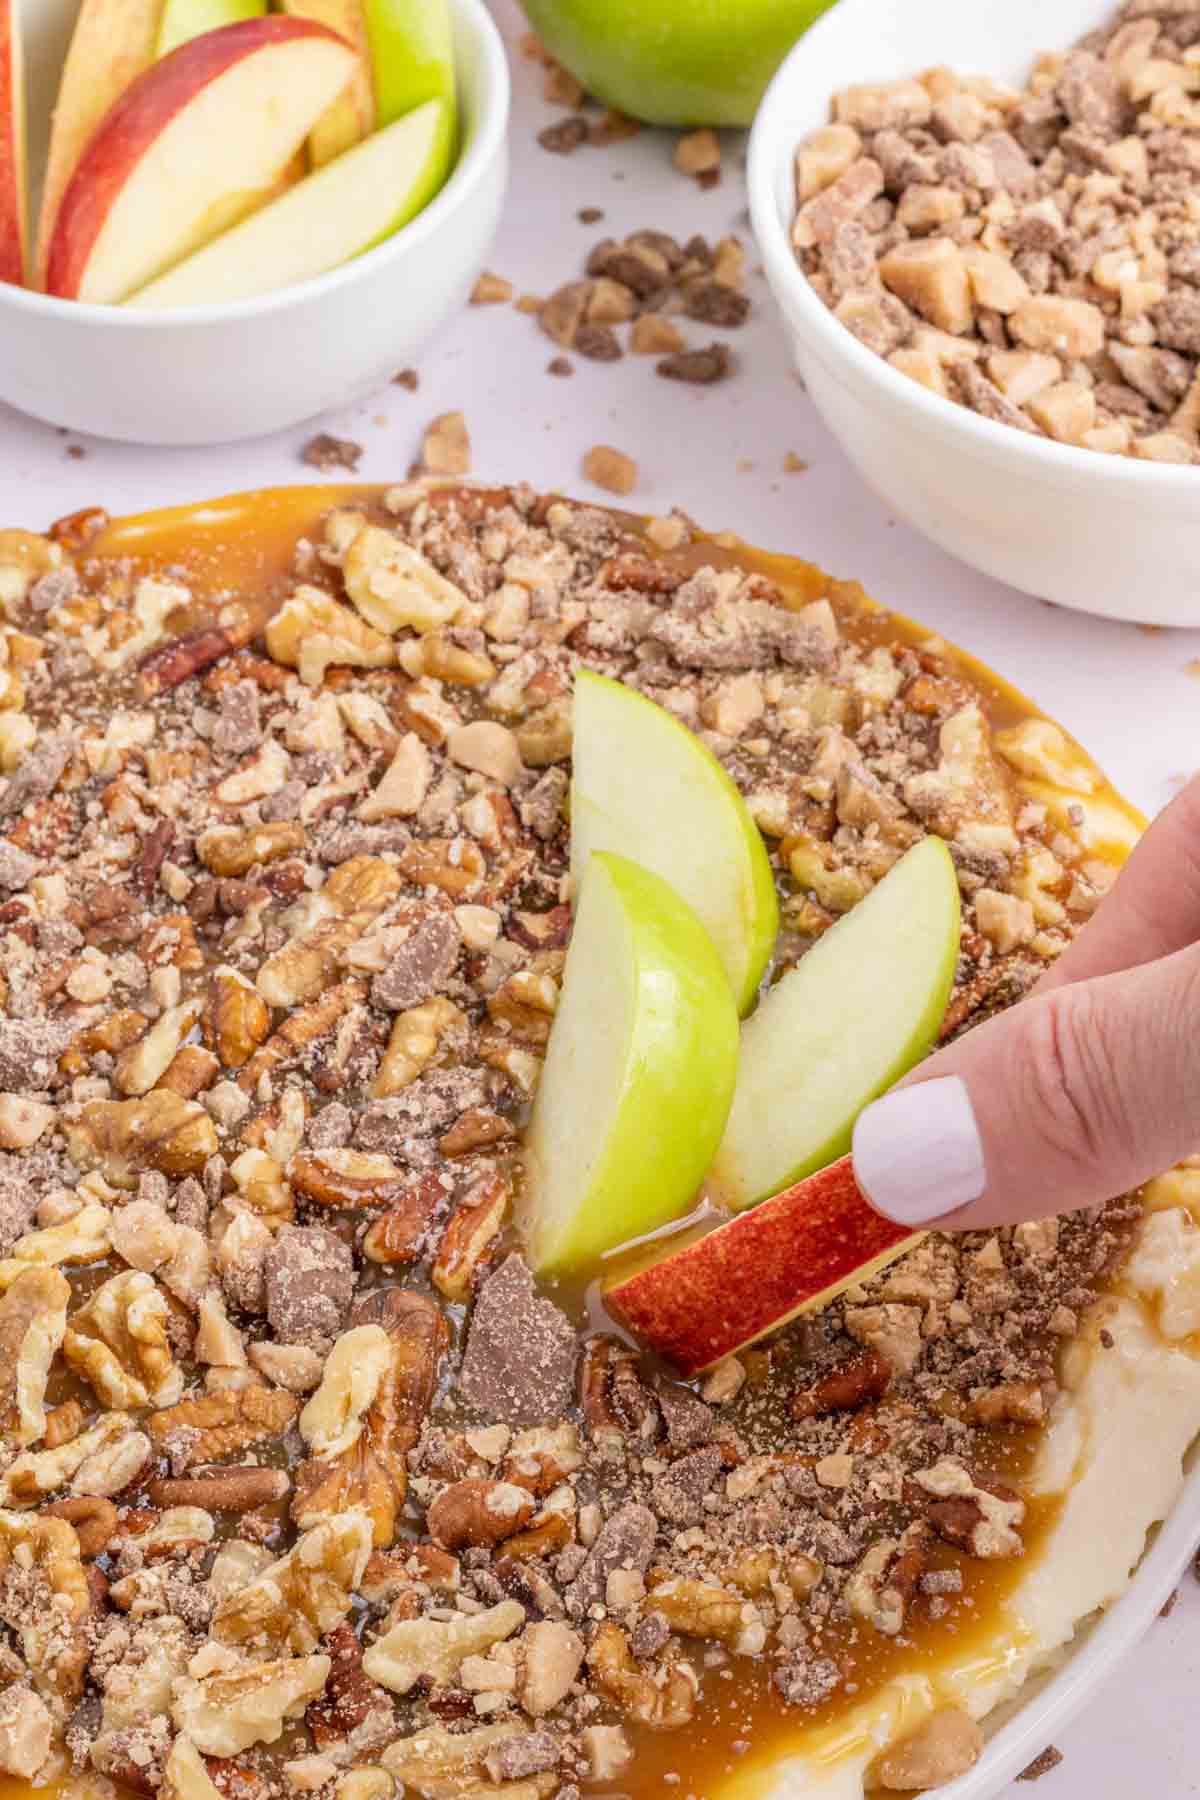 Cream Cheese Caramel Apple Dip is a fun and easy dessert recipe using cream cheese, powdered sugar, caramel sauce, chopped nuts and toffee pieces.